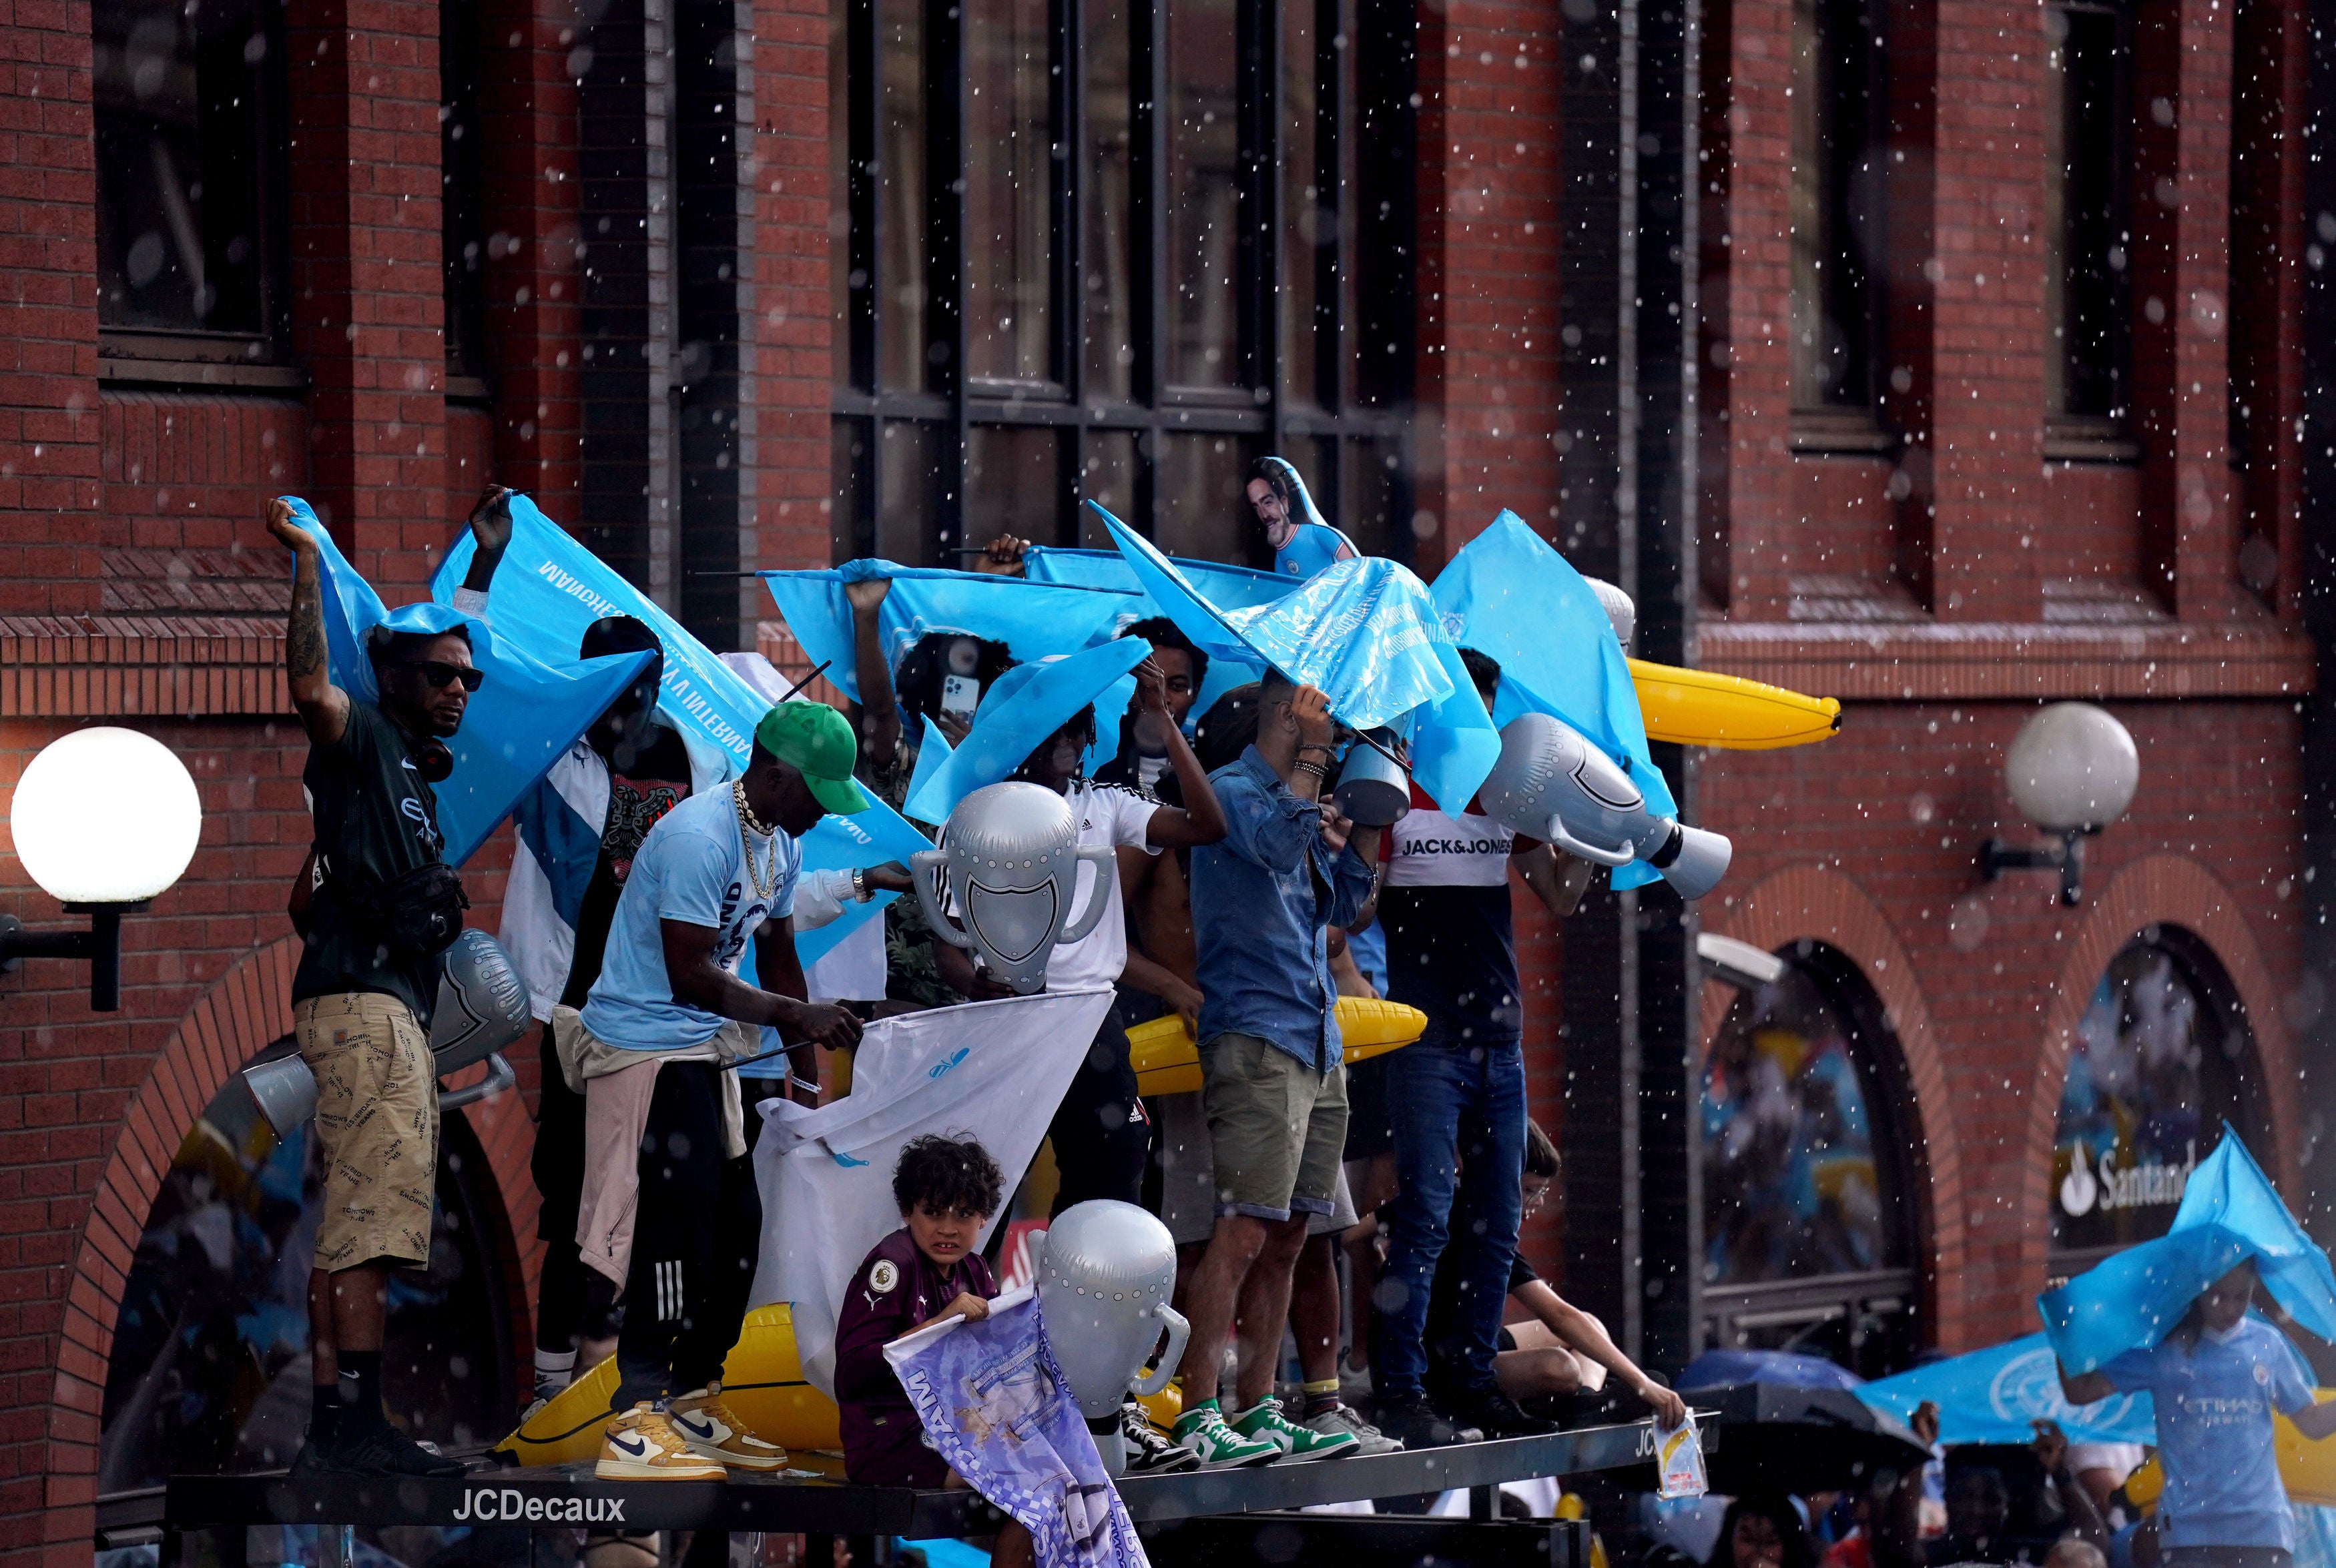 pManchester City fans take shelter from the rain ahead of the Treble Parade in Manchester./p